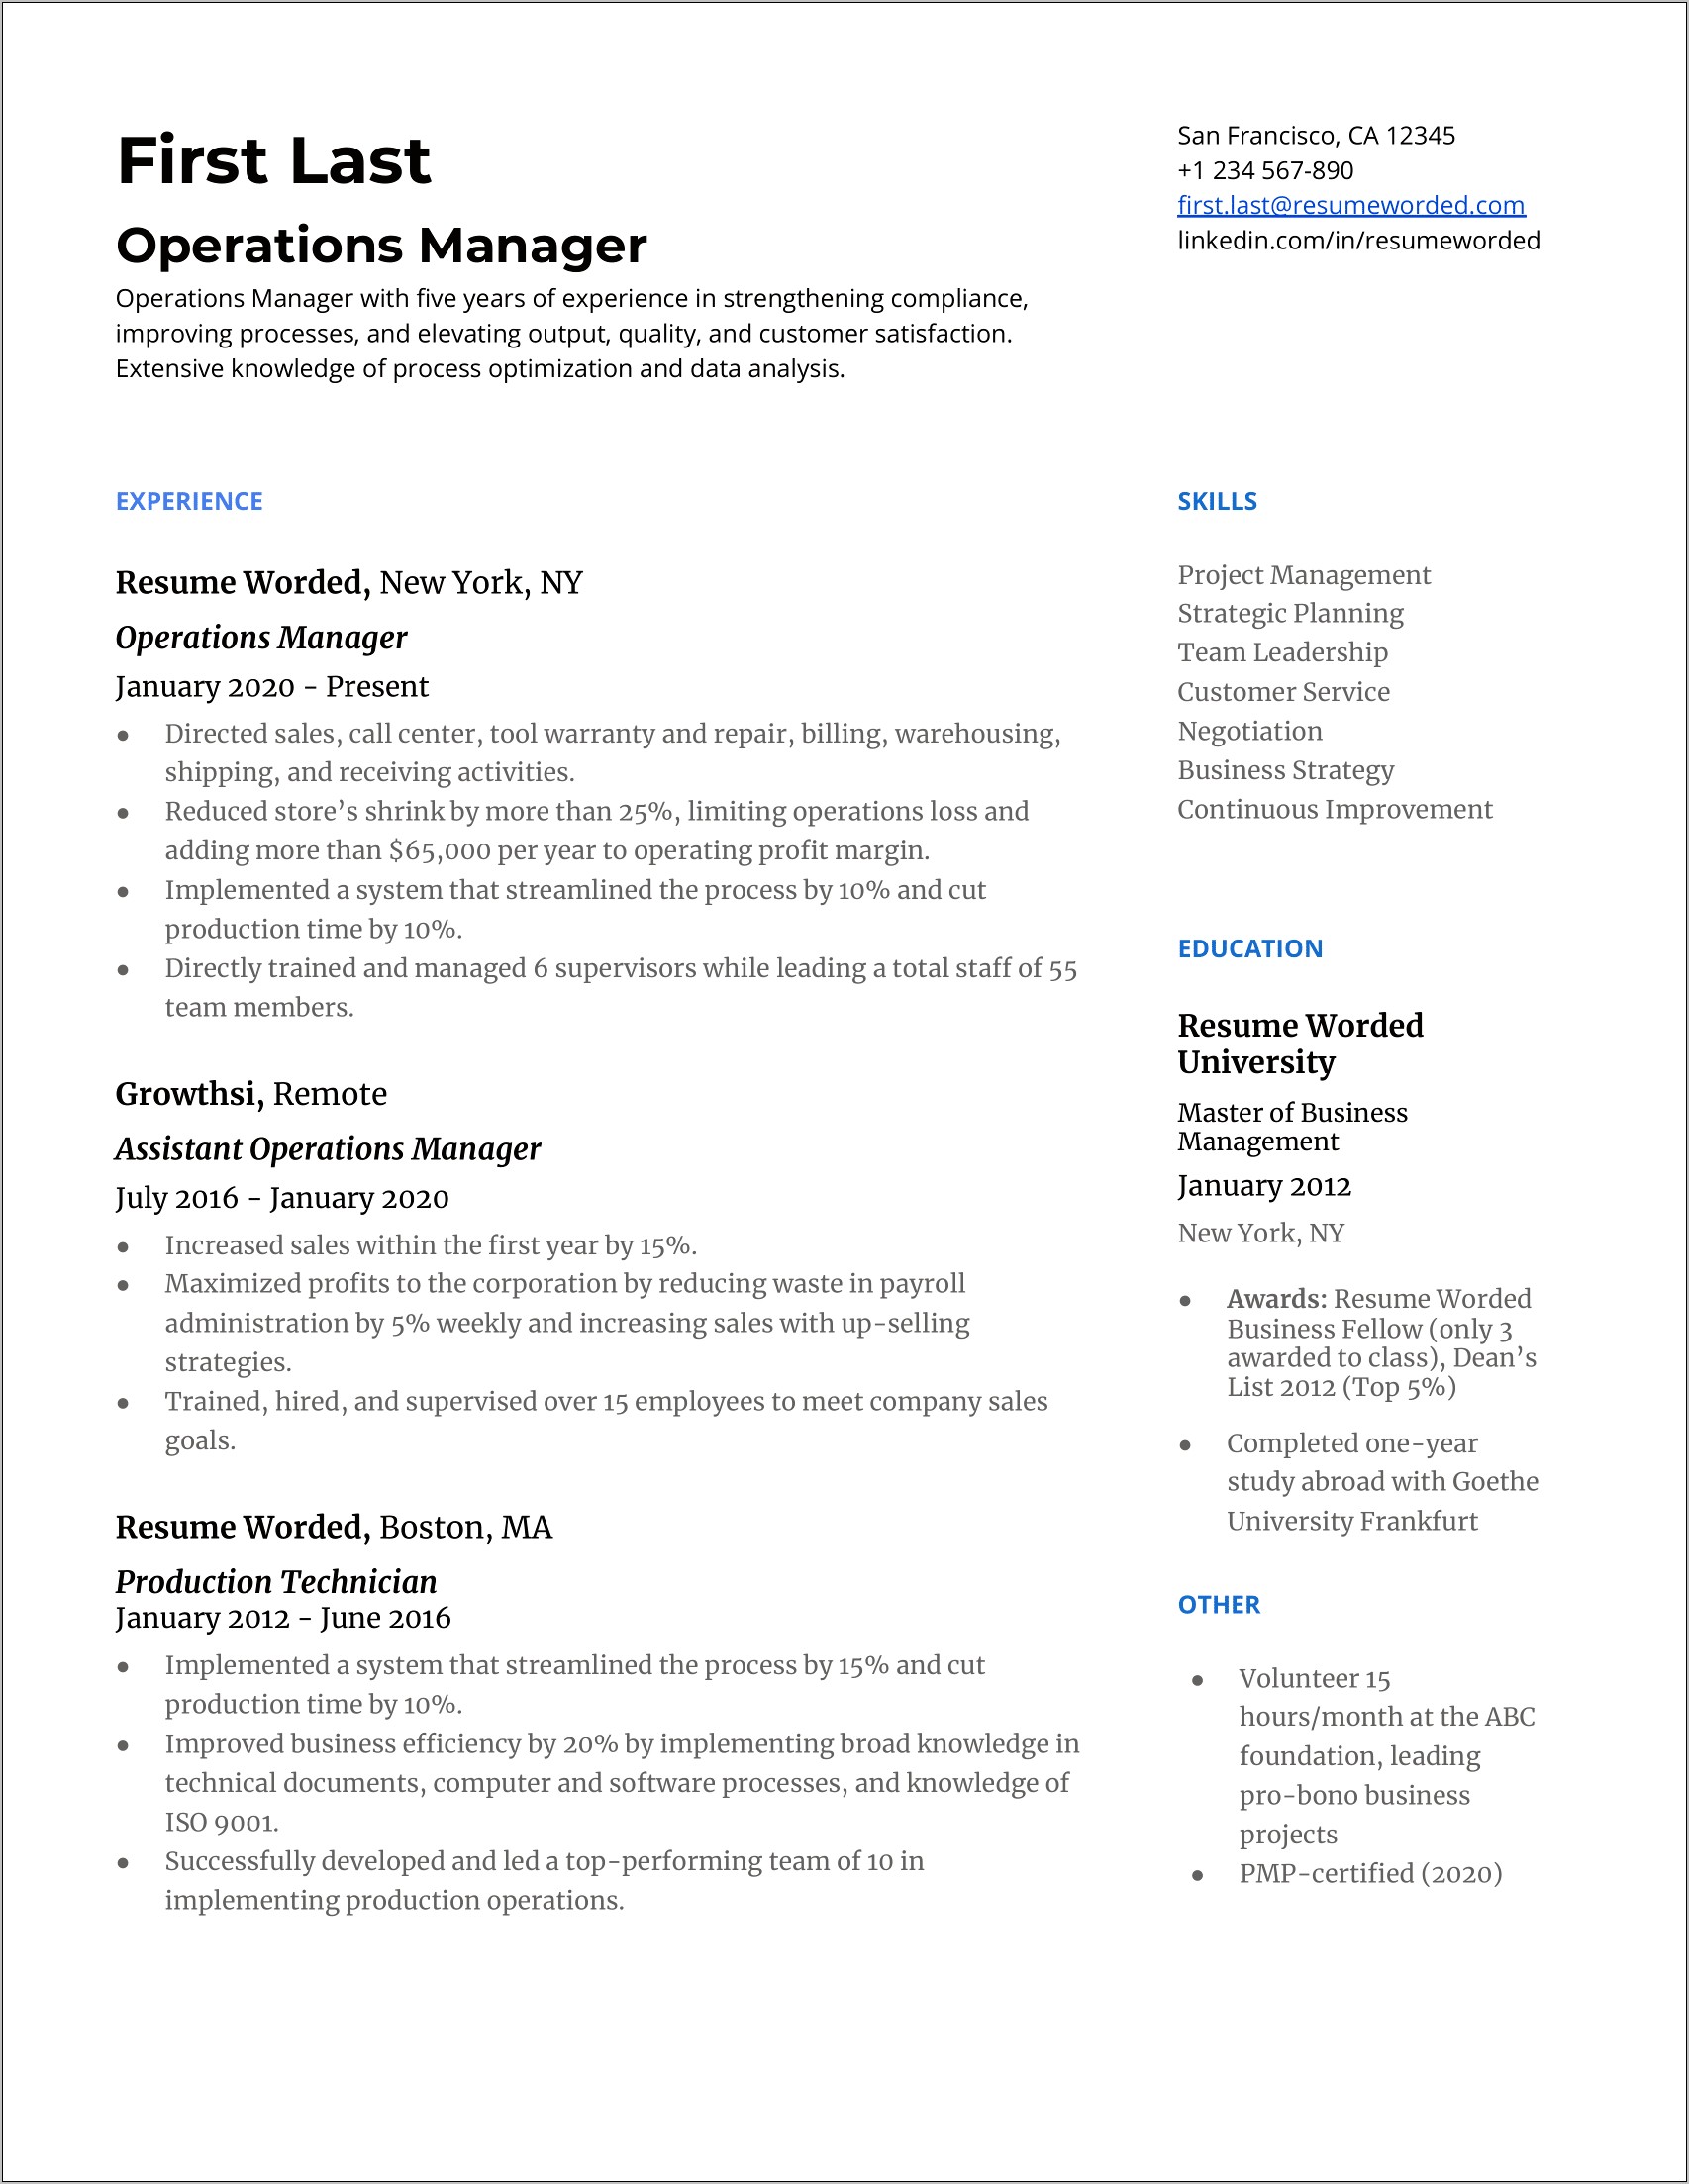 Sample Resume With Listed Skills